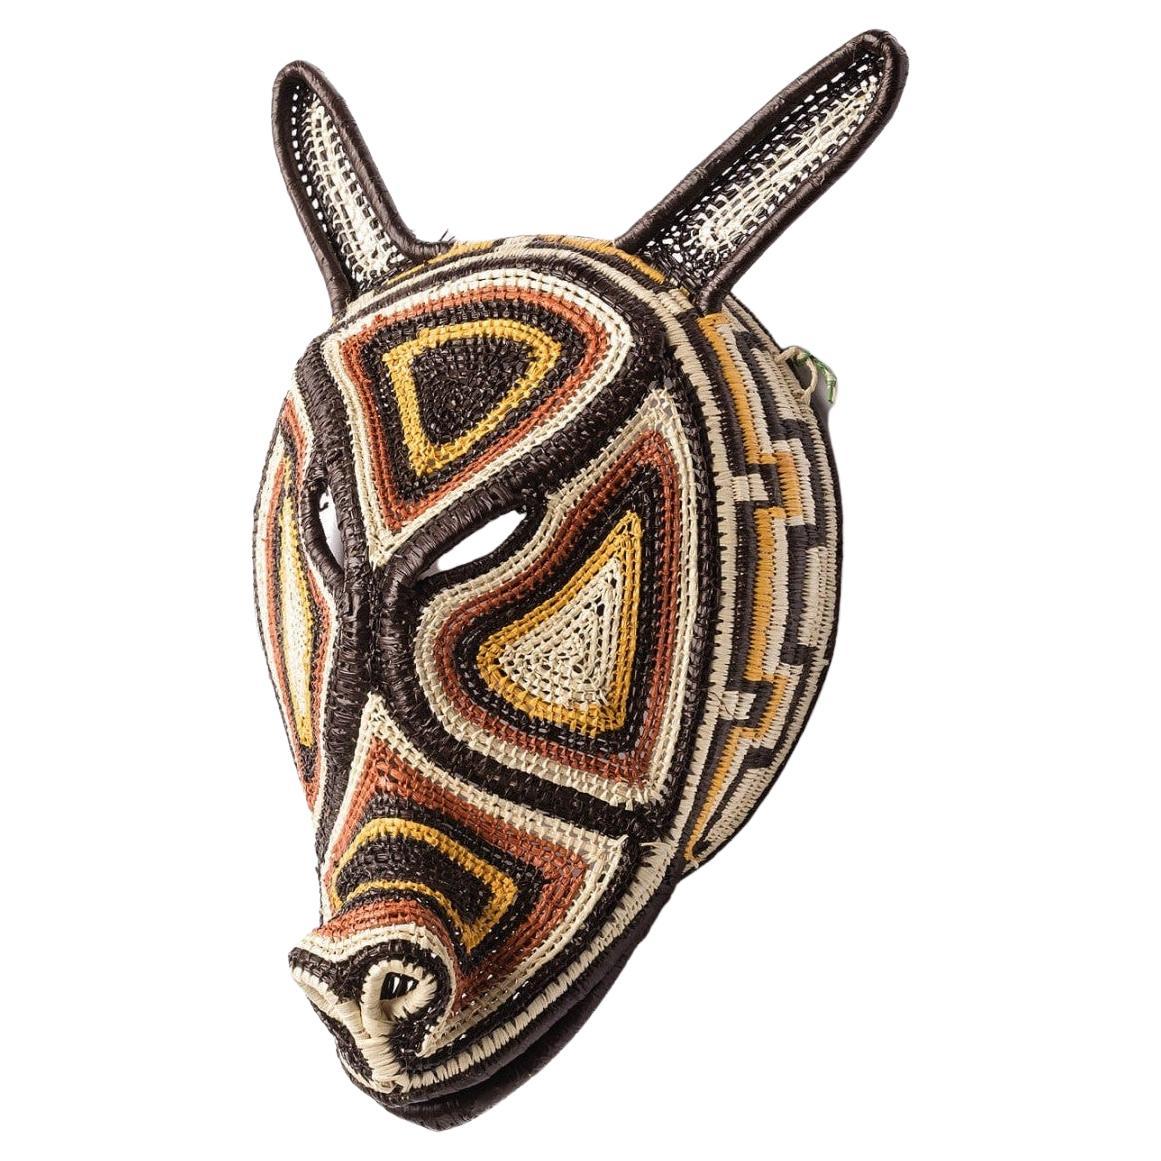 Decorative Hand-Woven Mask from Panama, Nemboro by Ethic&Tropic For Sale